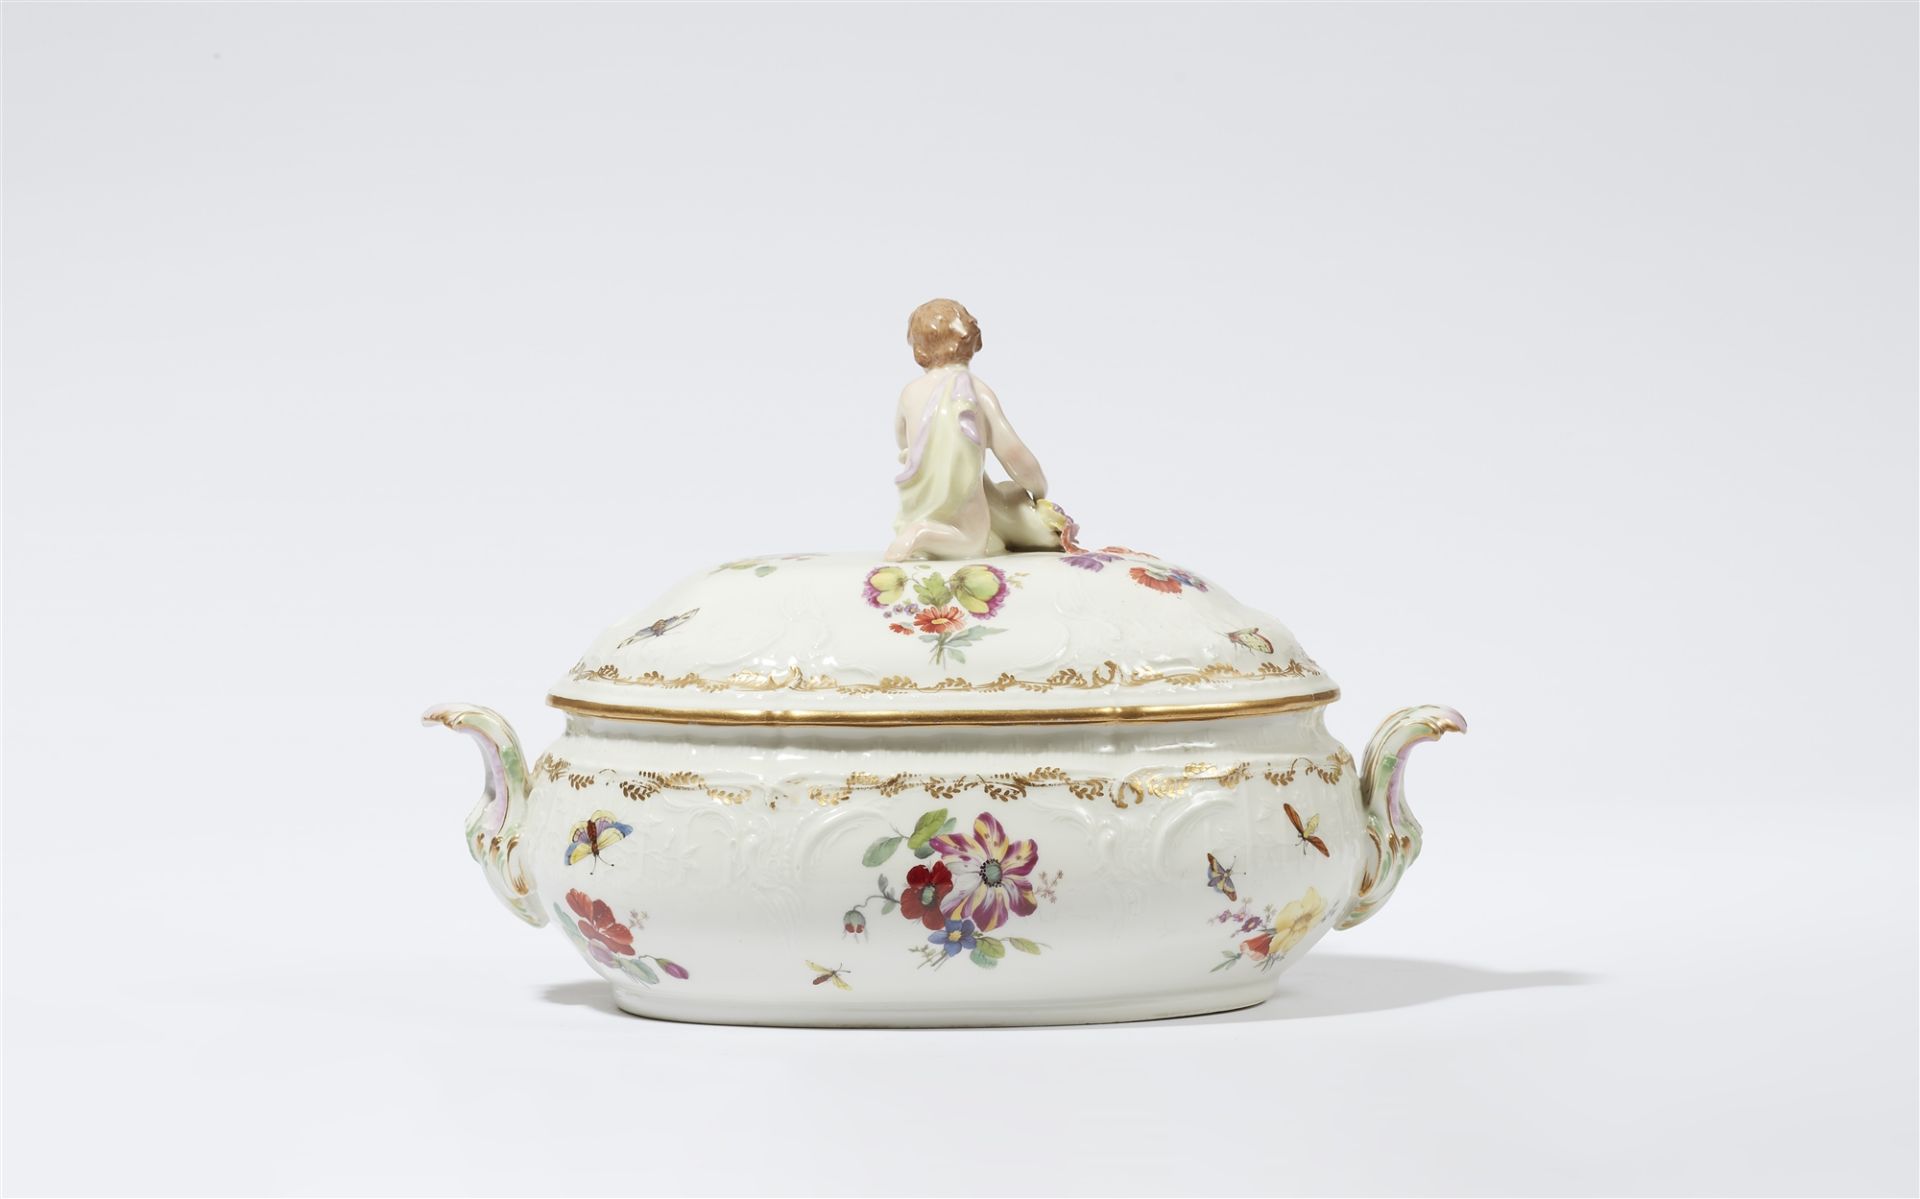 An oval Berlin KPM porcelain tureen and cover from the dinner service for Berlin Palace - Image 2 of 2